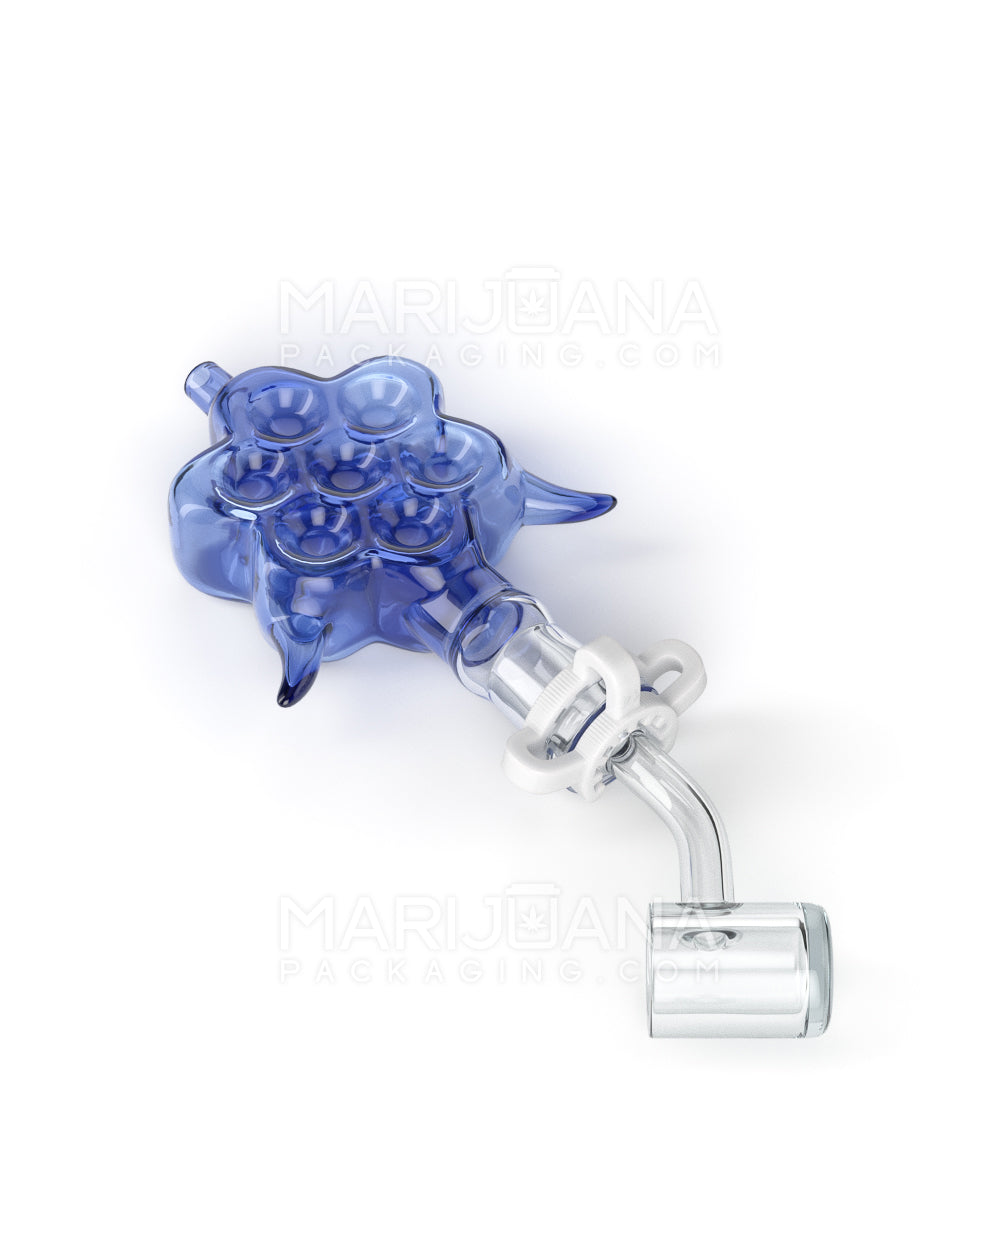 Horned Honeycomb Glass Nectar Collector w/ Banger Nail | 4in Long - 14mm Attachment - Blue - 5